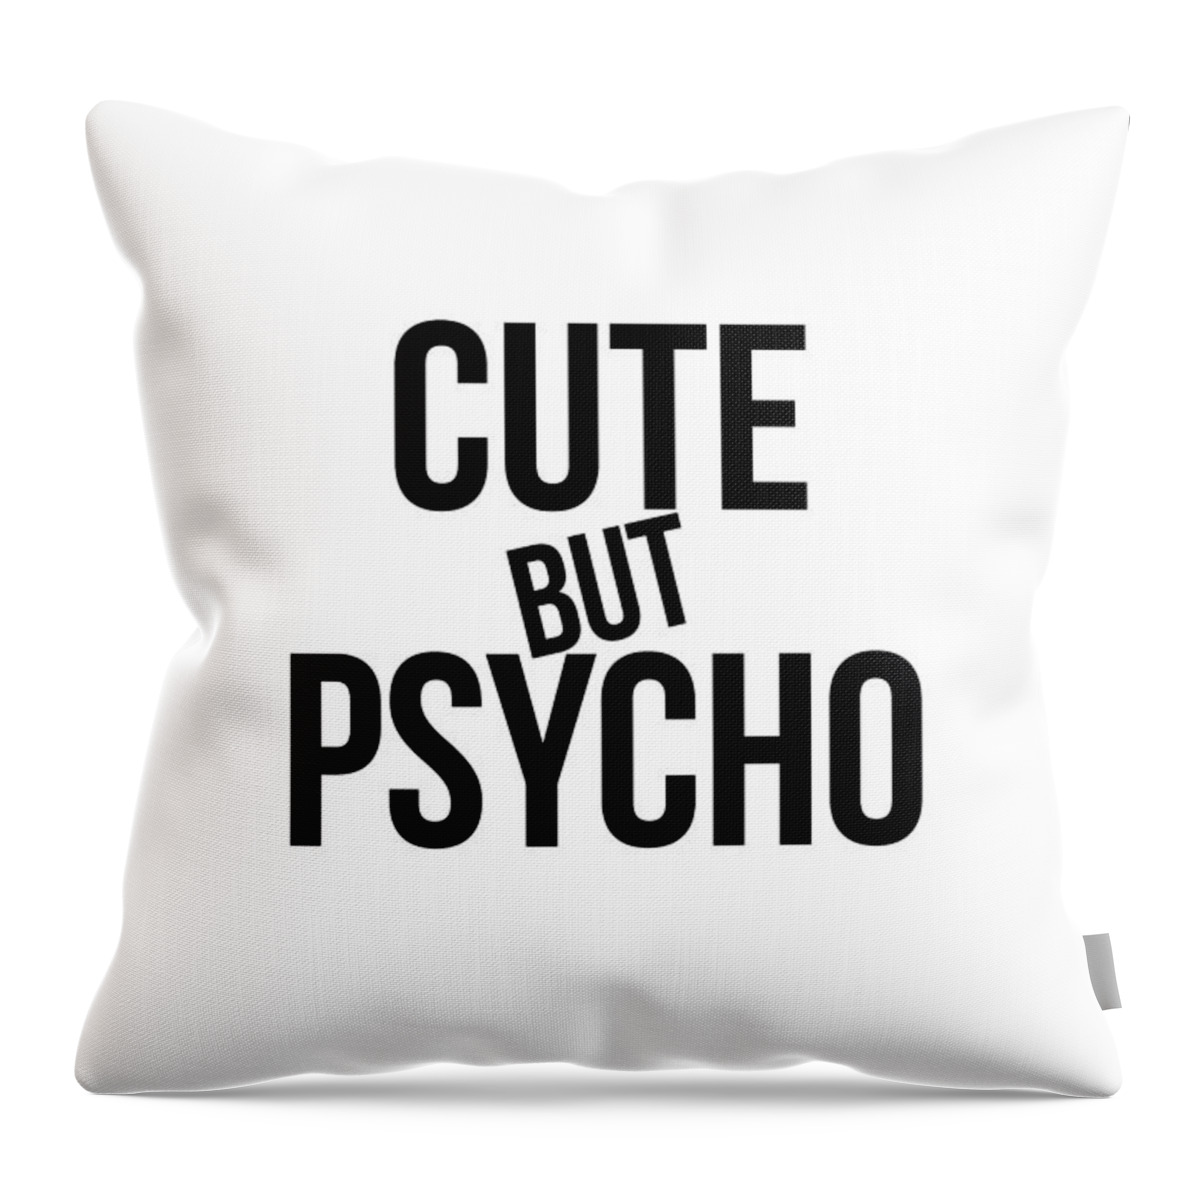 Minimalist Throw Pillow featuring the photograph Cute by Psycho #humor #minimalism #funart by Andrea Anderegg